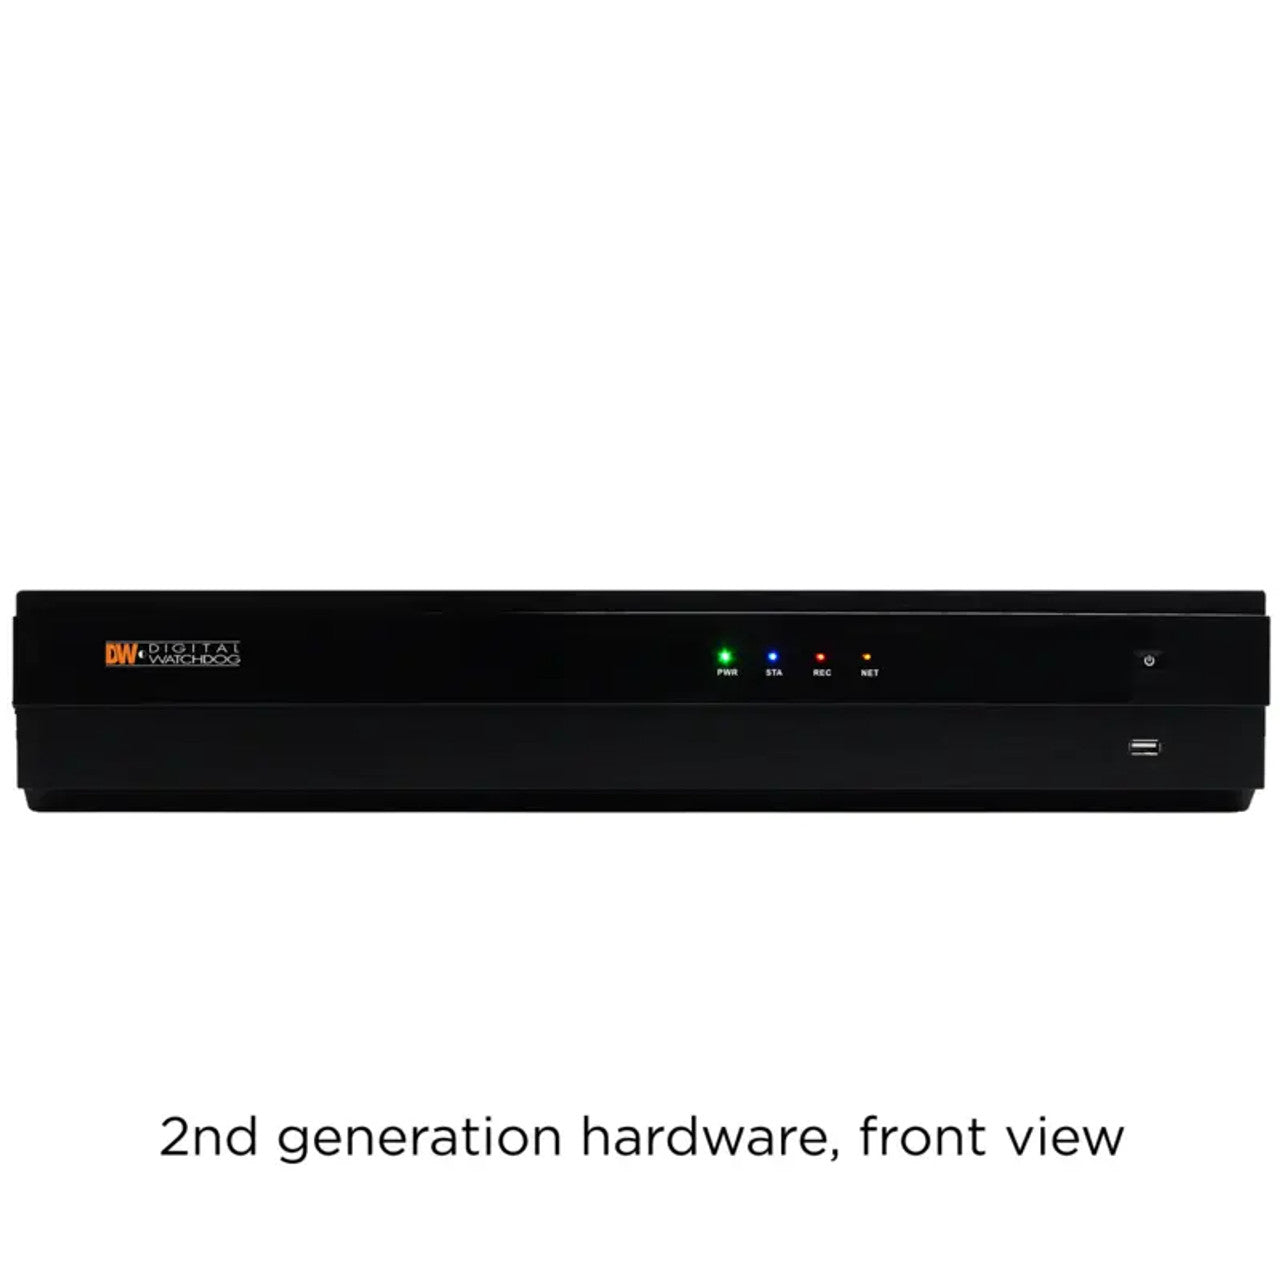 Digital Watchdog DW-VP932T4P 4-channel VMAX IP Plus PoE NVR with 5 virtual channels, 32TB HDD